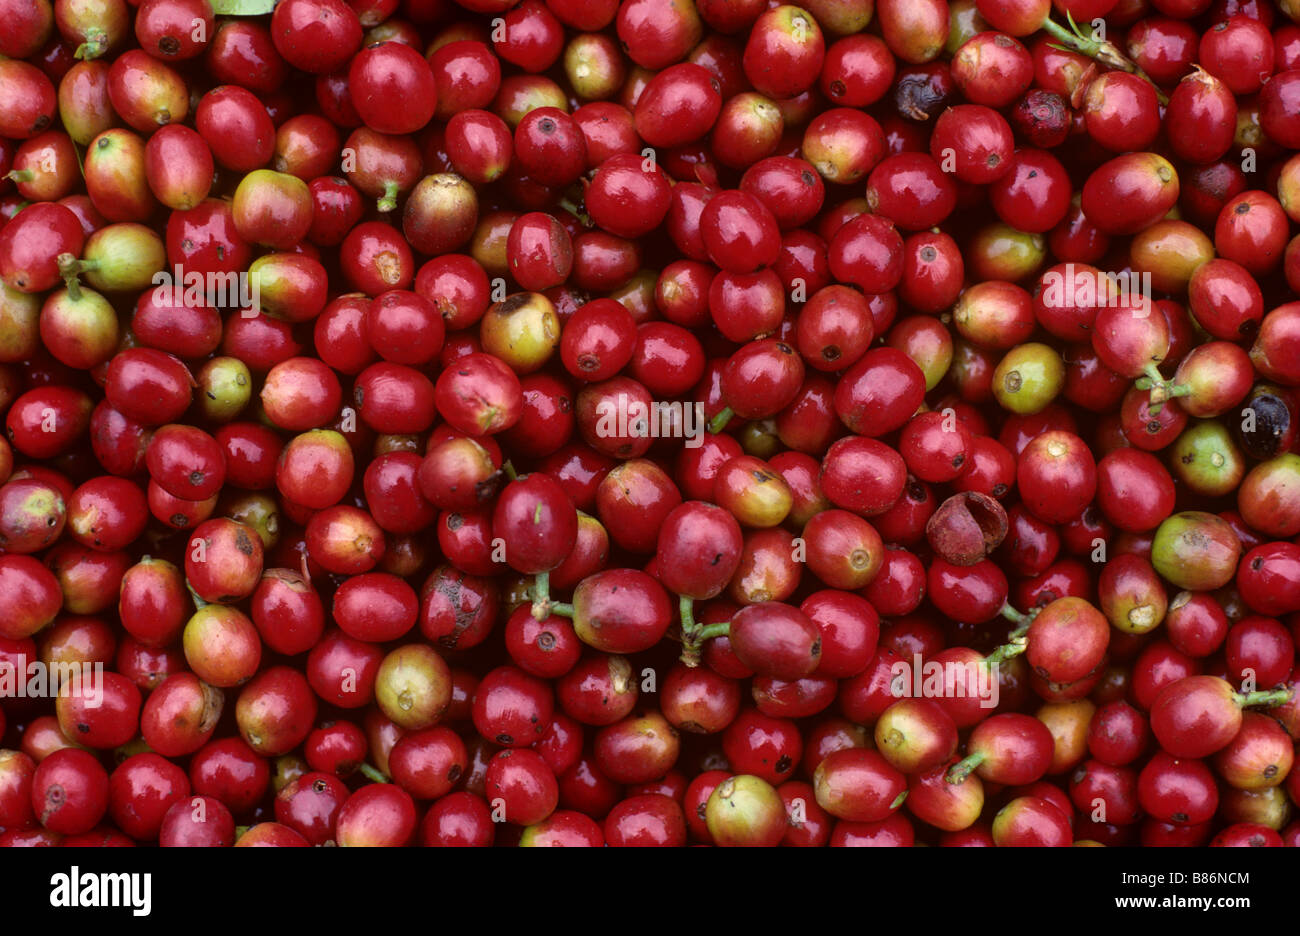 Ripe red Arabica coffee cherries after harvest and before pulping Nairobi Kenya Stock Photo